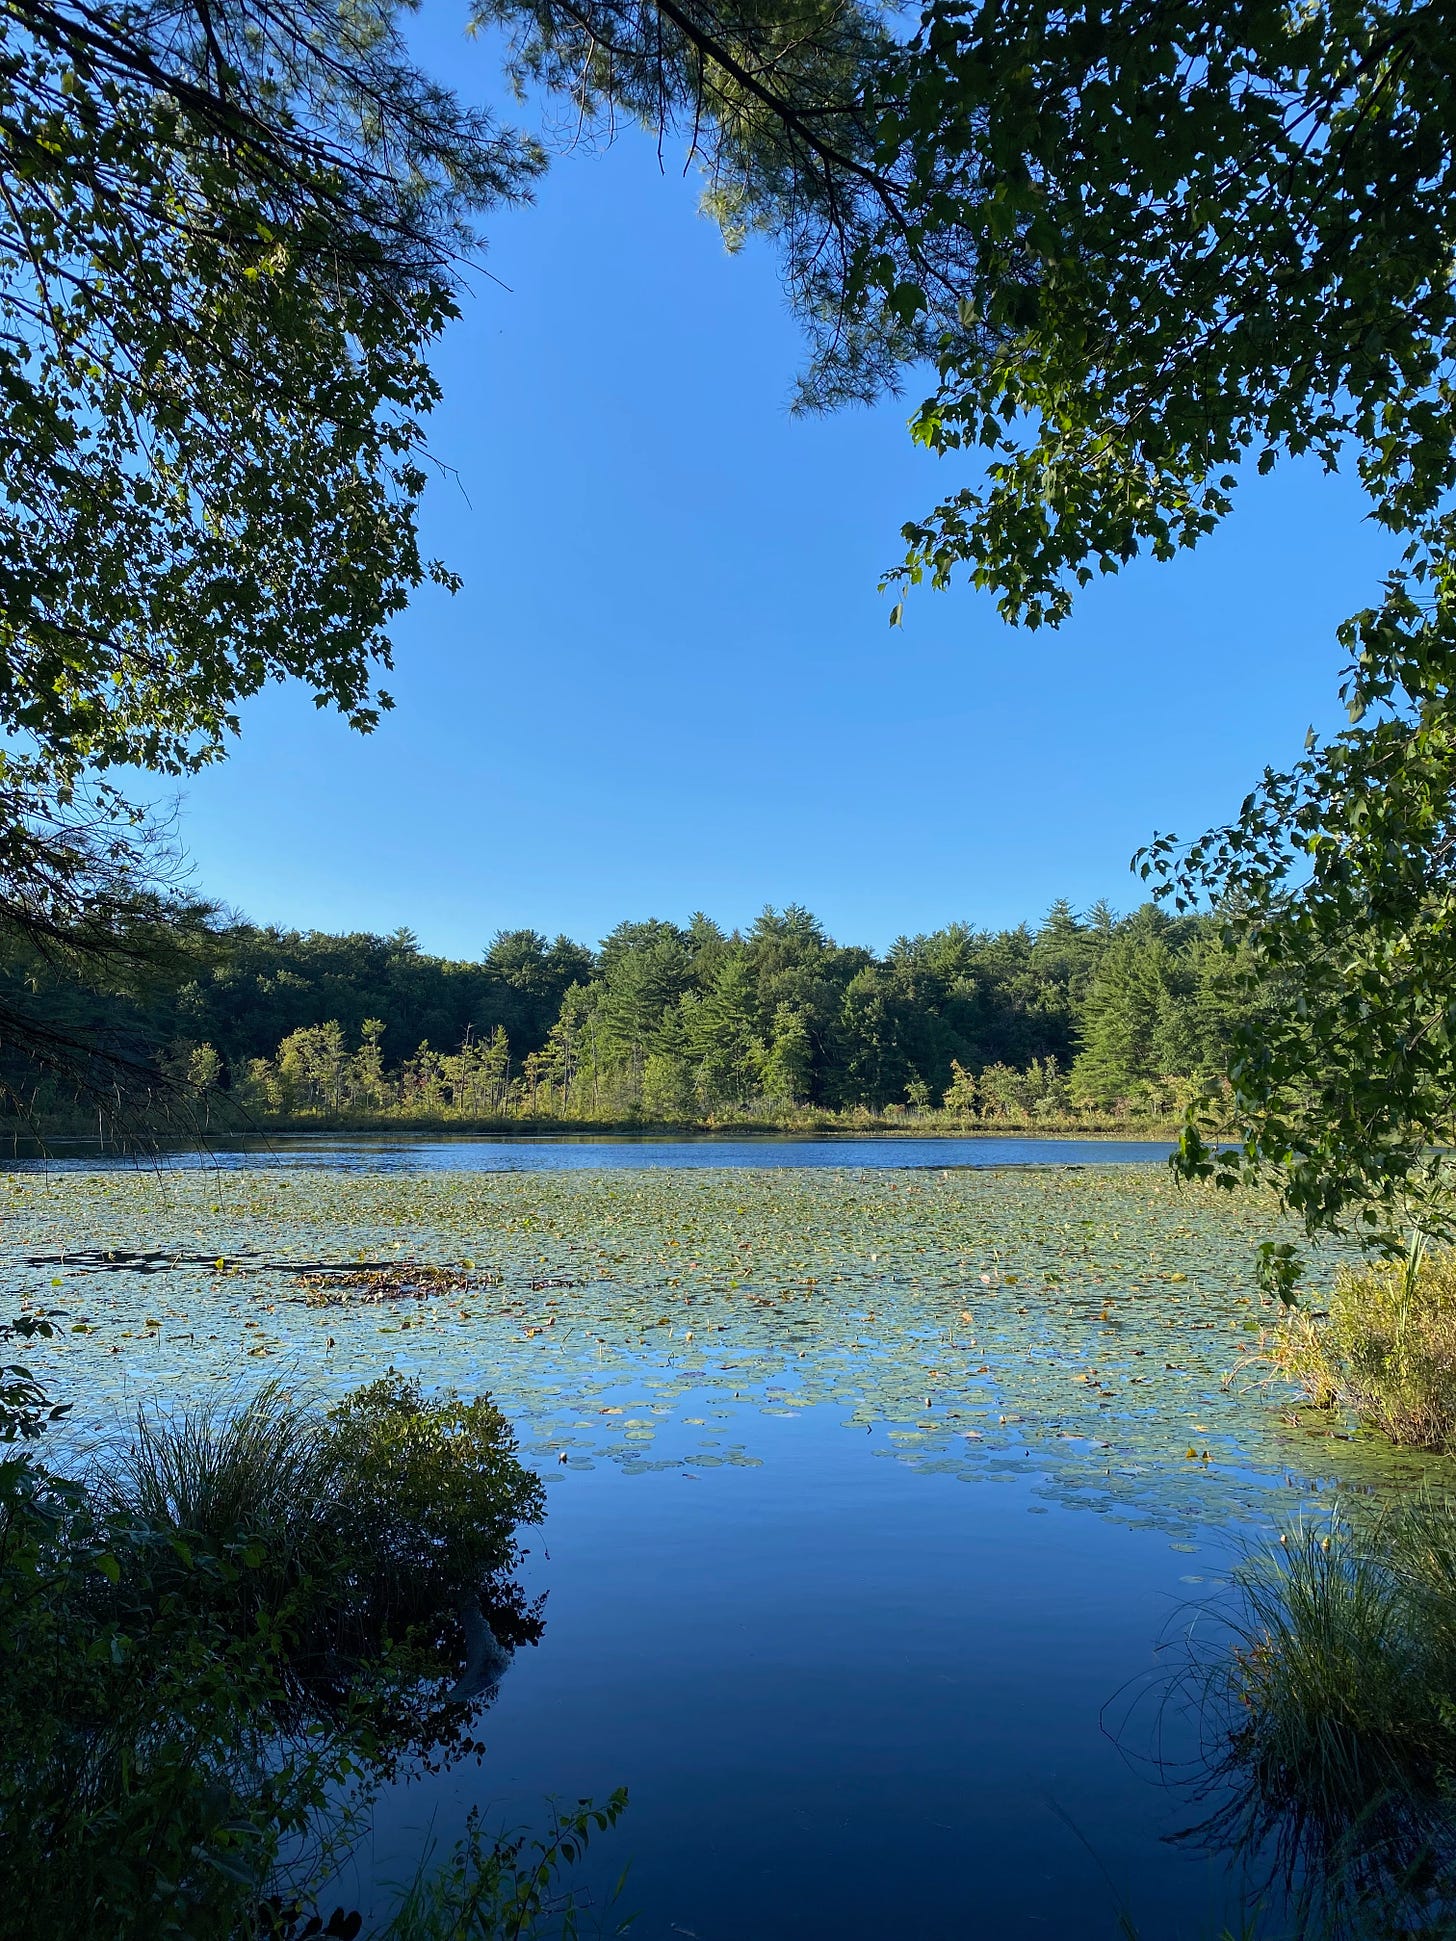 A bright blue pond framed by overhanging green tree branches on either side, a bright blue sky, and a distant treeline on the far shore. The surface of the pond is covered in lily pads.